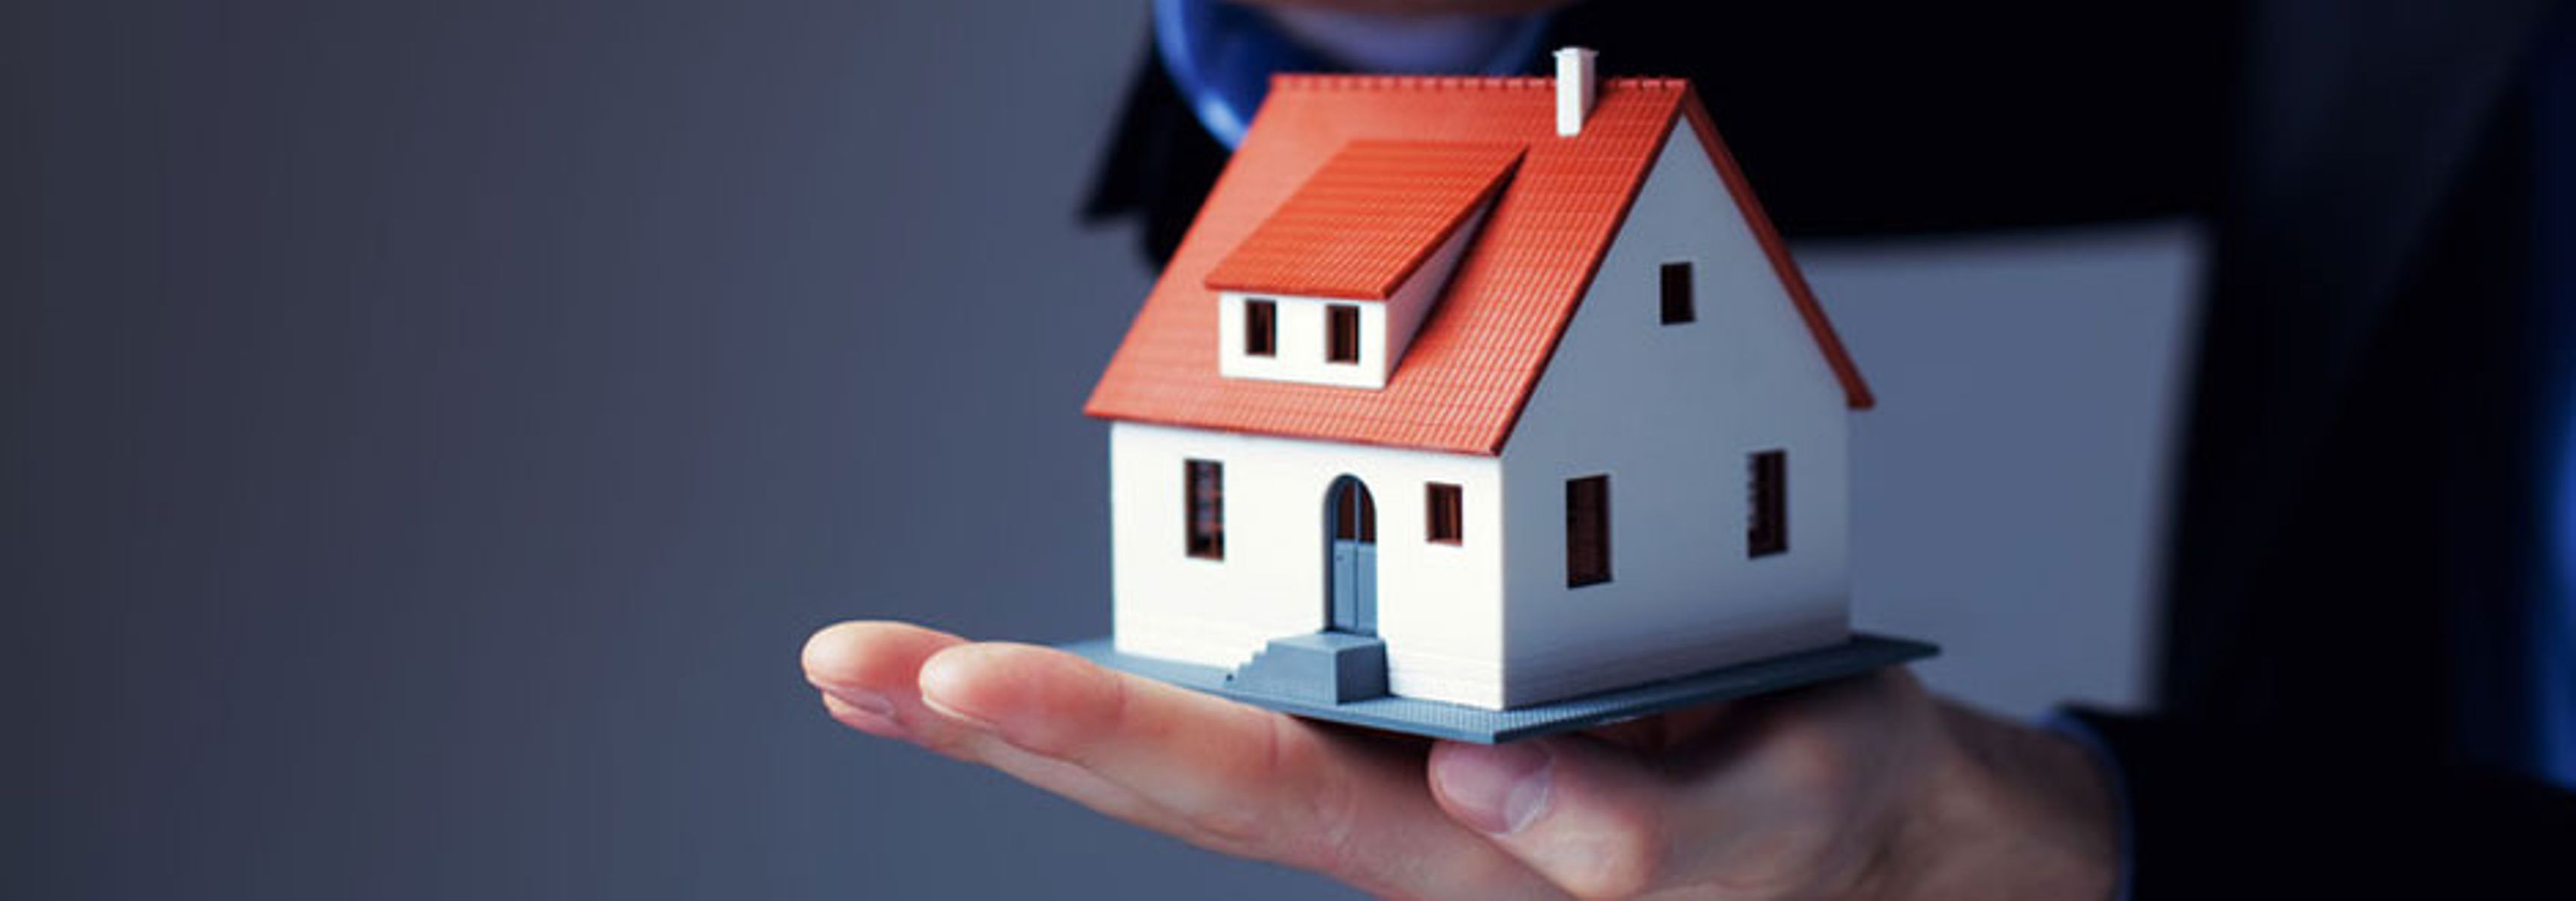 What's your insurance responsibility when buying a home?